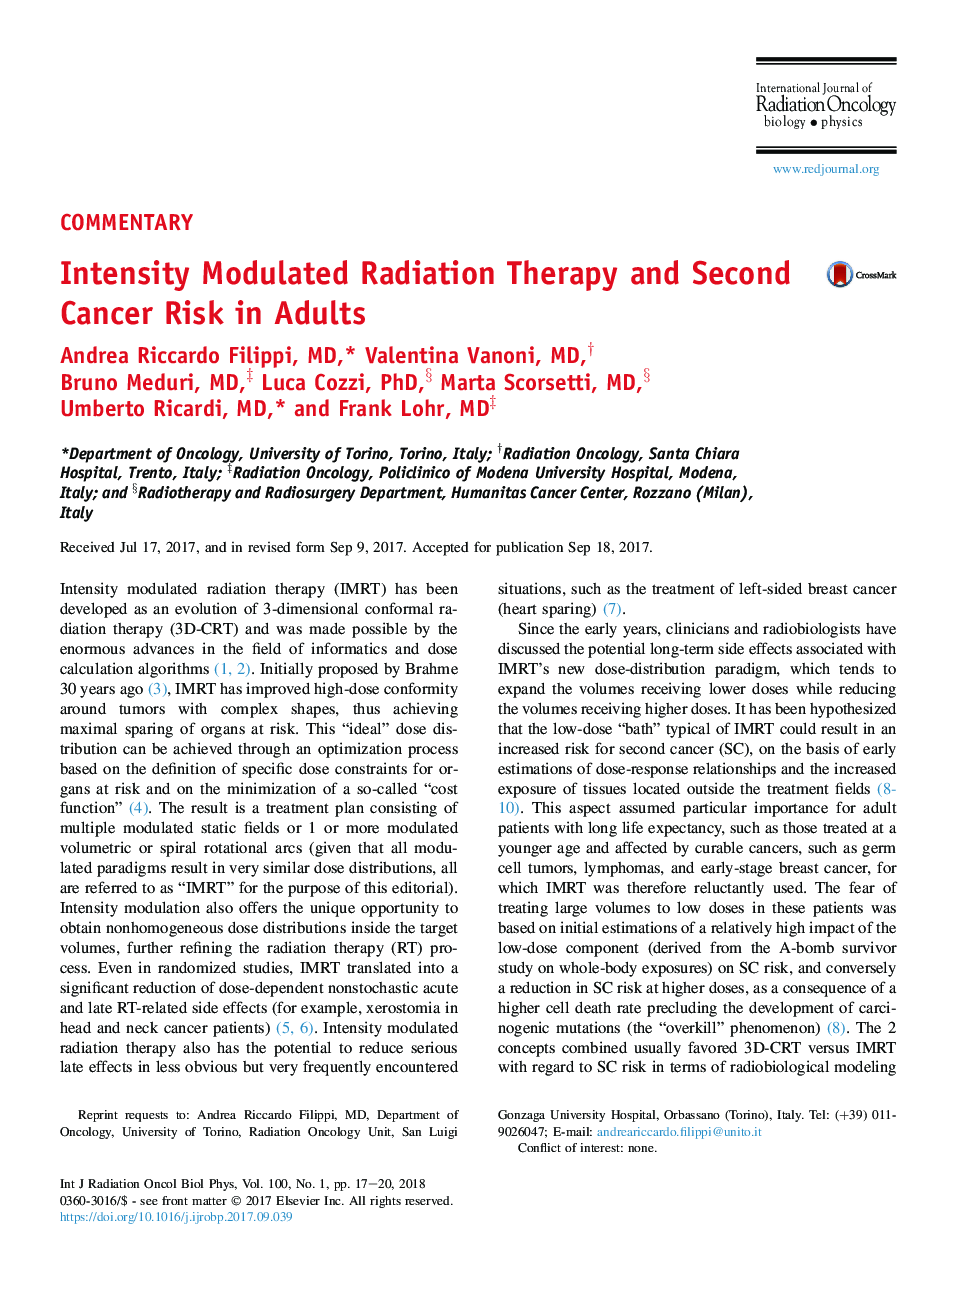 Intensity Modulated Radiation Therapy and Second Cancer Risk in Adults